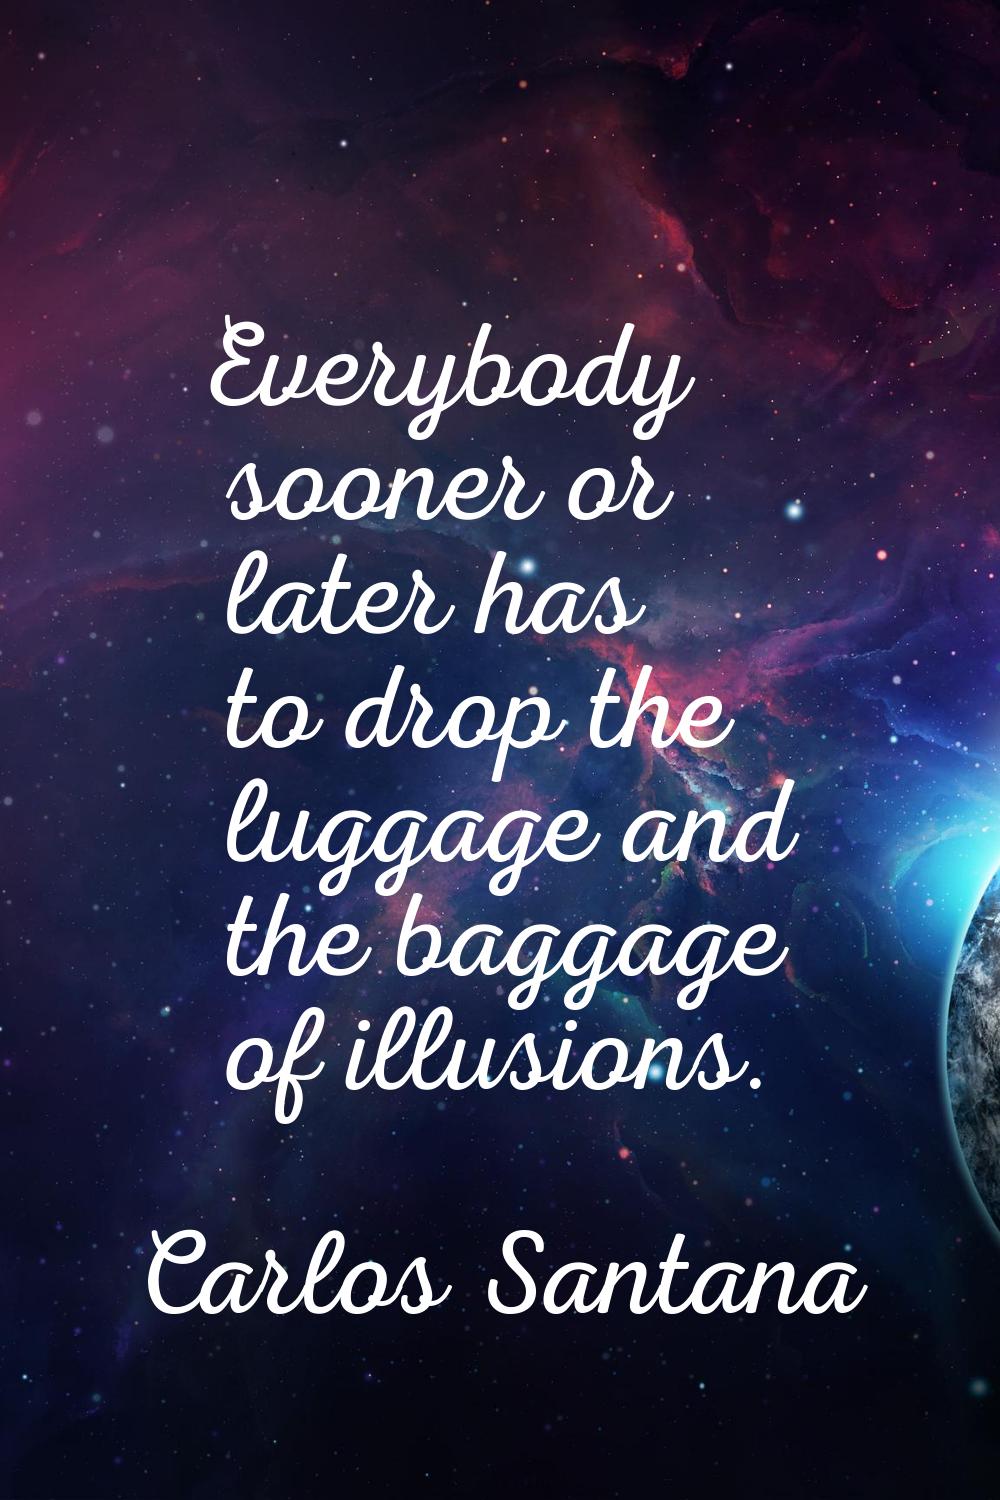 Everybody sooner or later has to drop the luggage and the baggage of illusions.